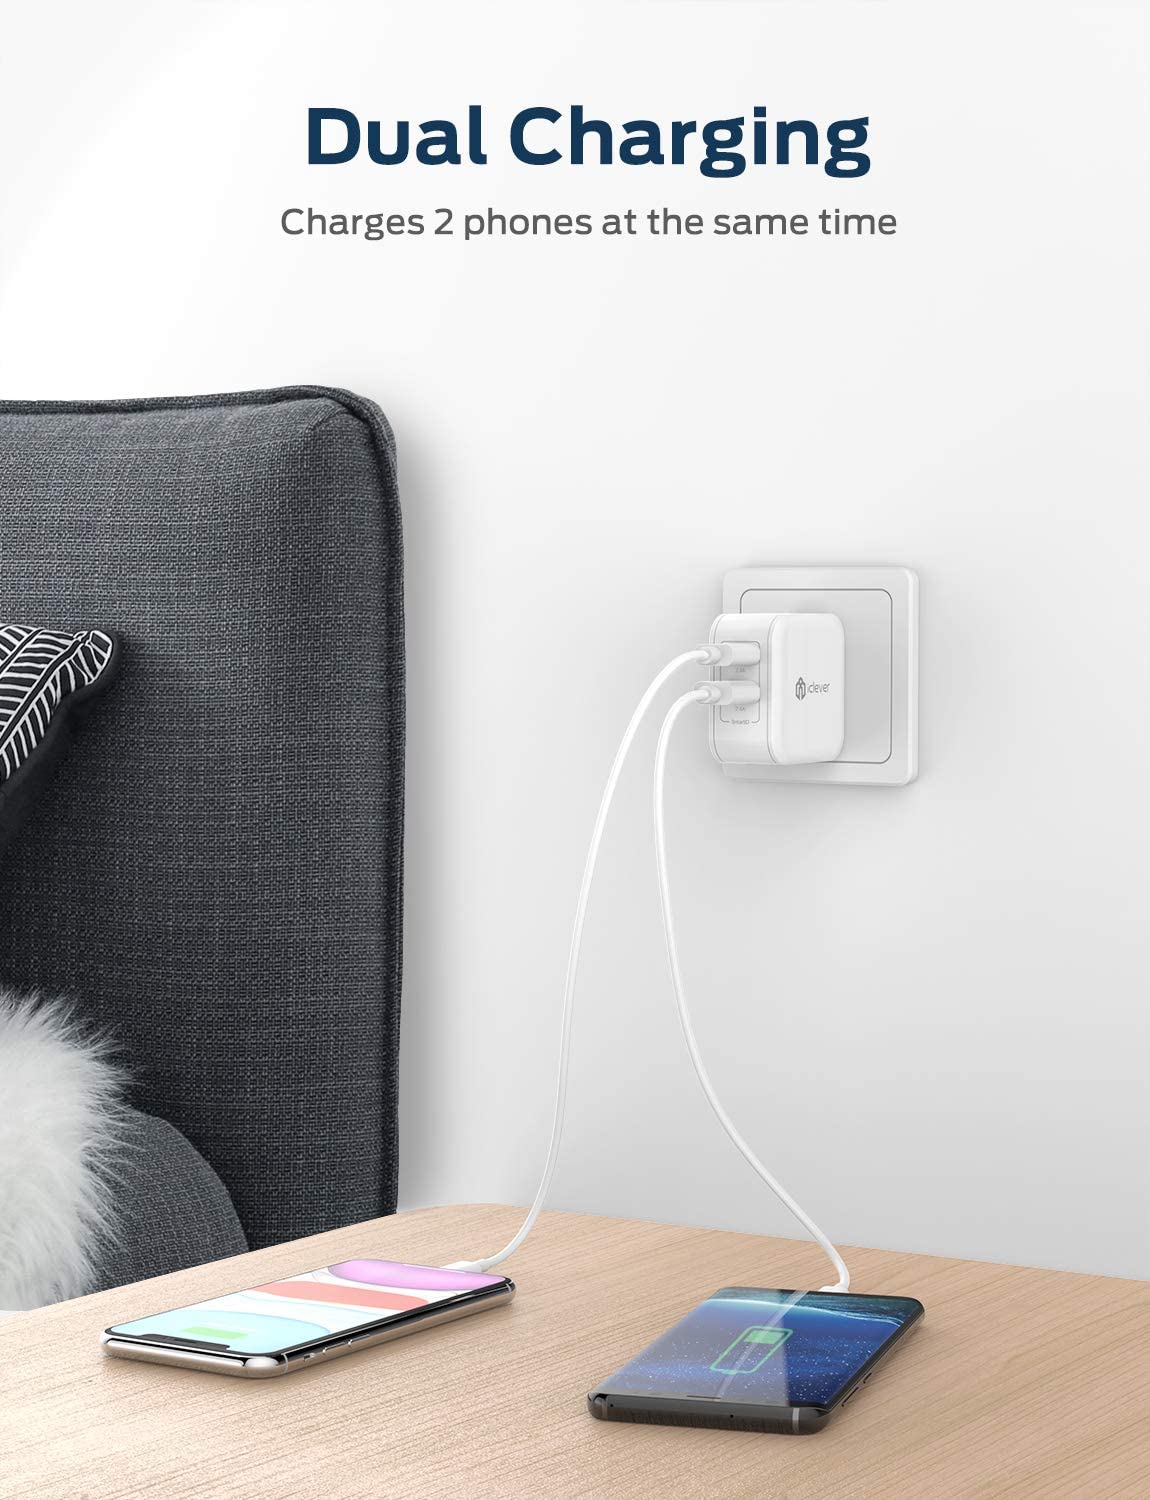 iClever BoostCube 2nd Generation 24W Dual USB Wall Charger with SmartID Technology, Foldable Plug, Travel Power Adapter for iPhone Xs/XS Max/XR/X/8 Plus/8/7 Plus/7/6S/6 Plus, iPad Pro Air/Mini and Other Tablet.